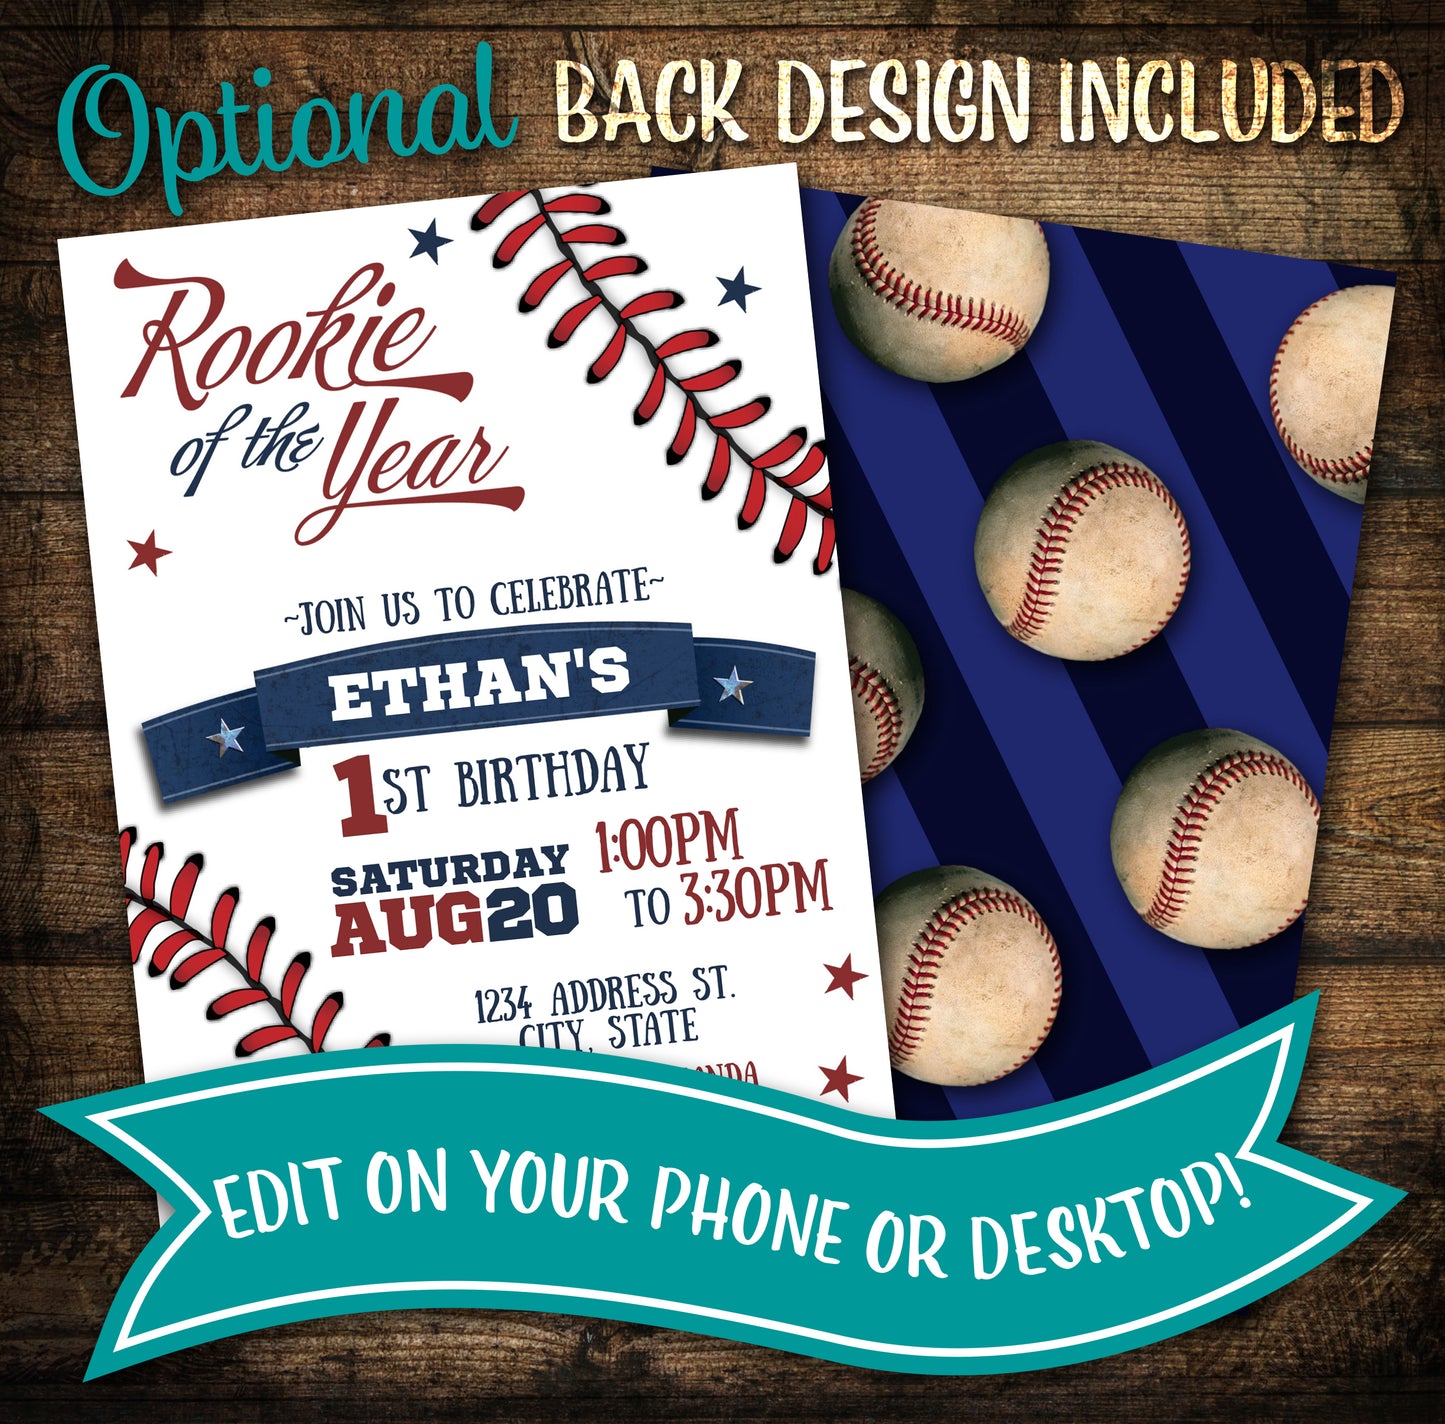 Rookie of the year first birthday invitation with back design